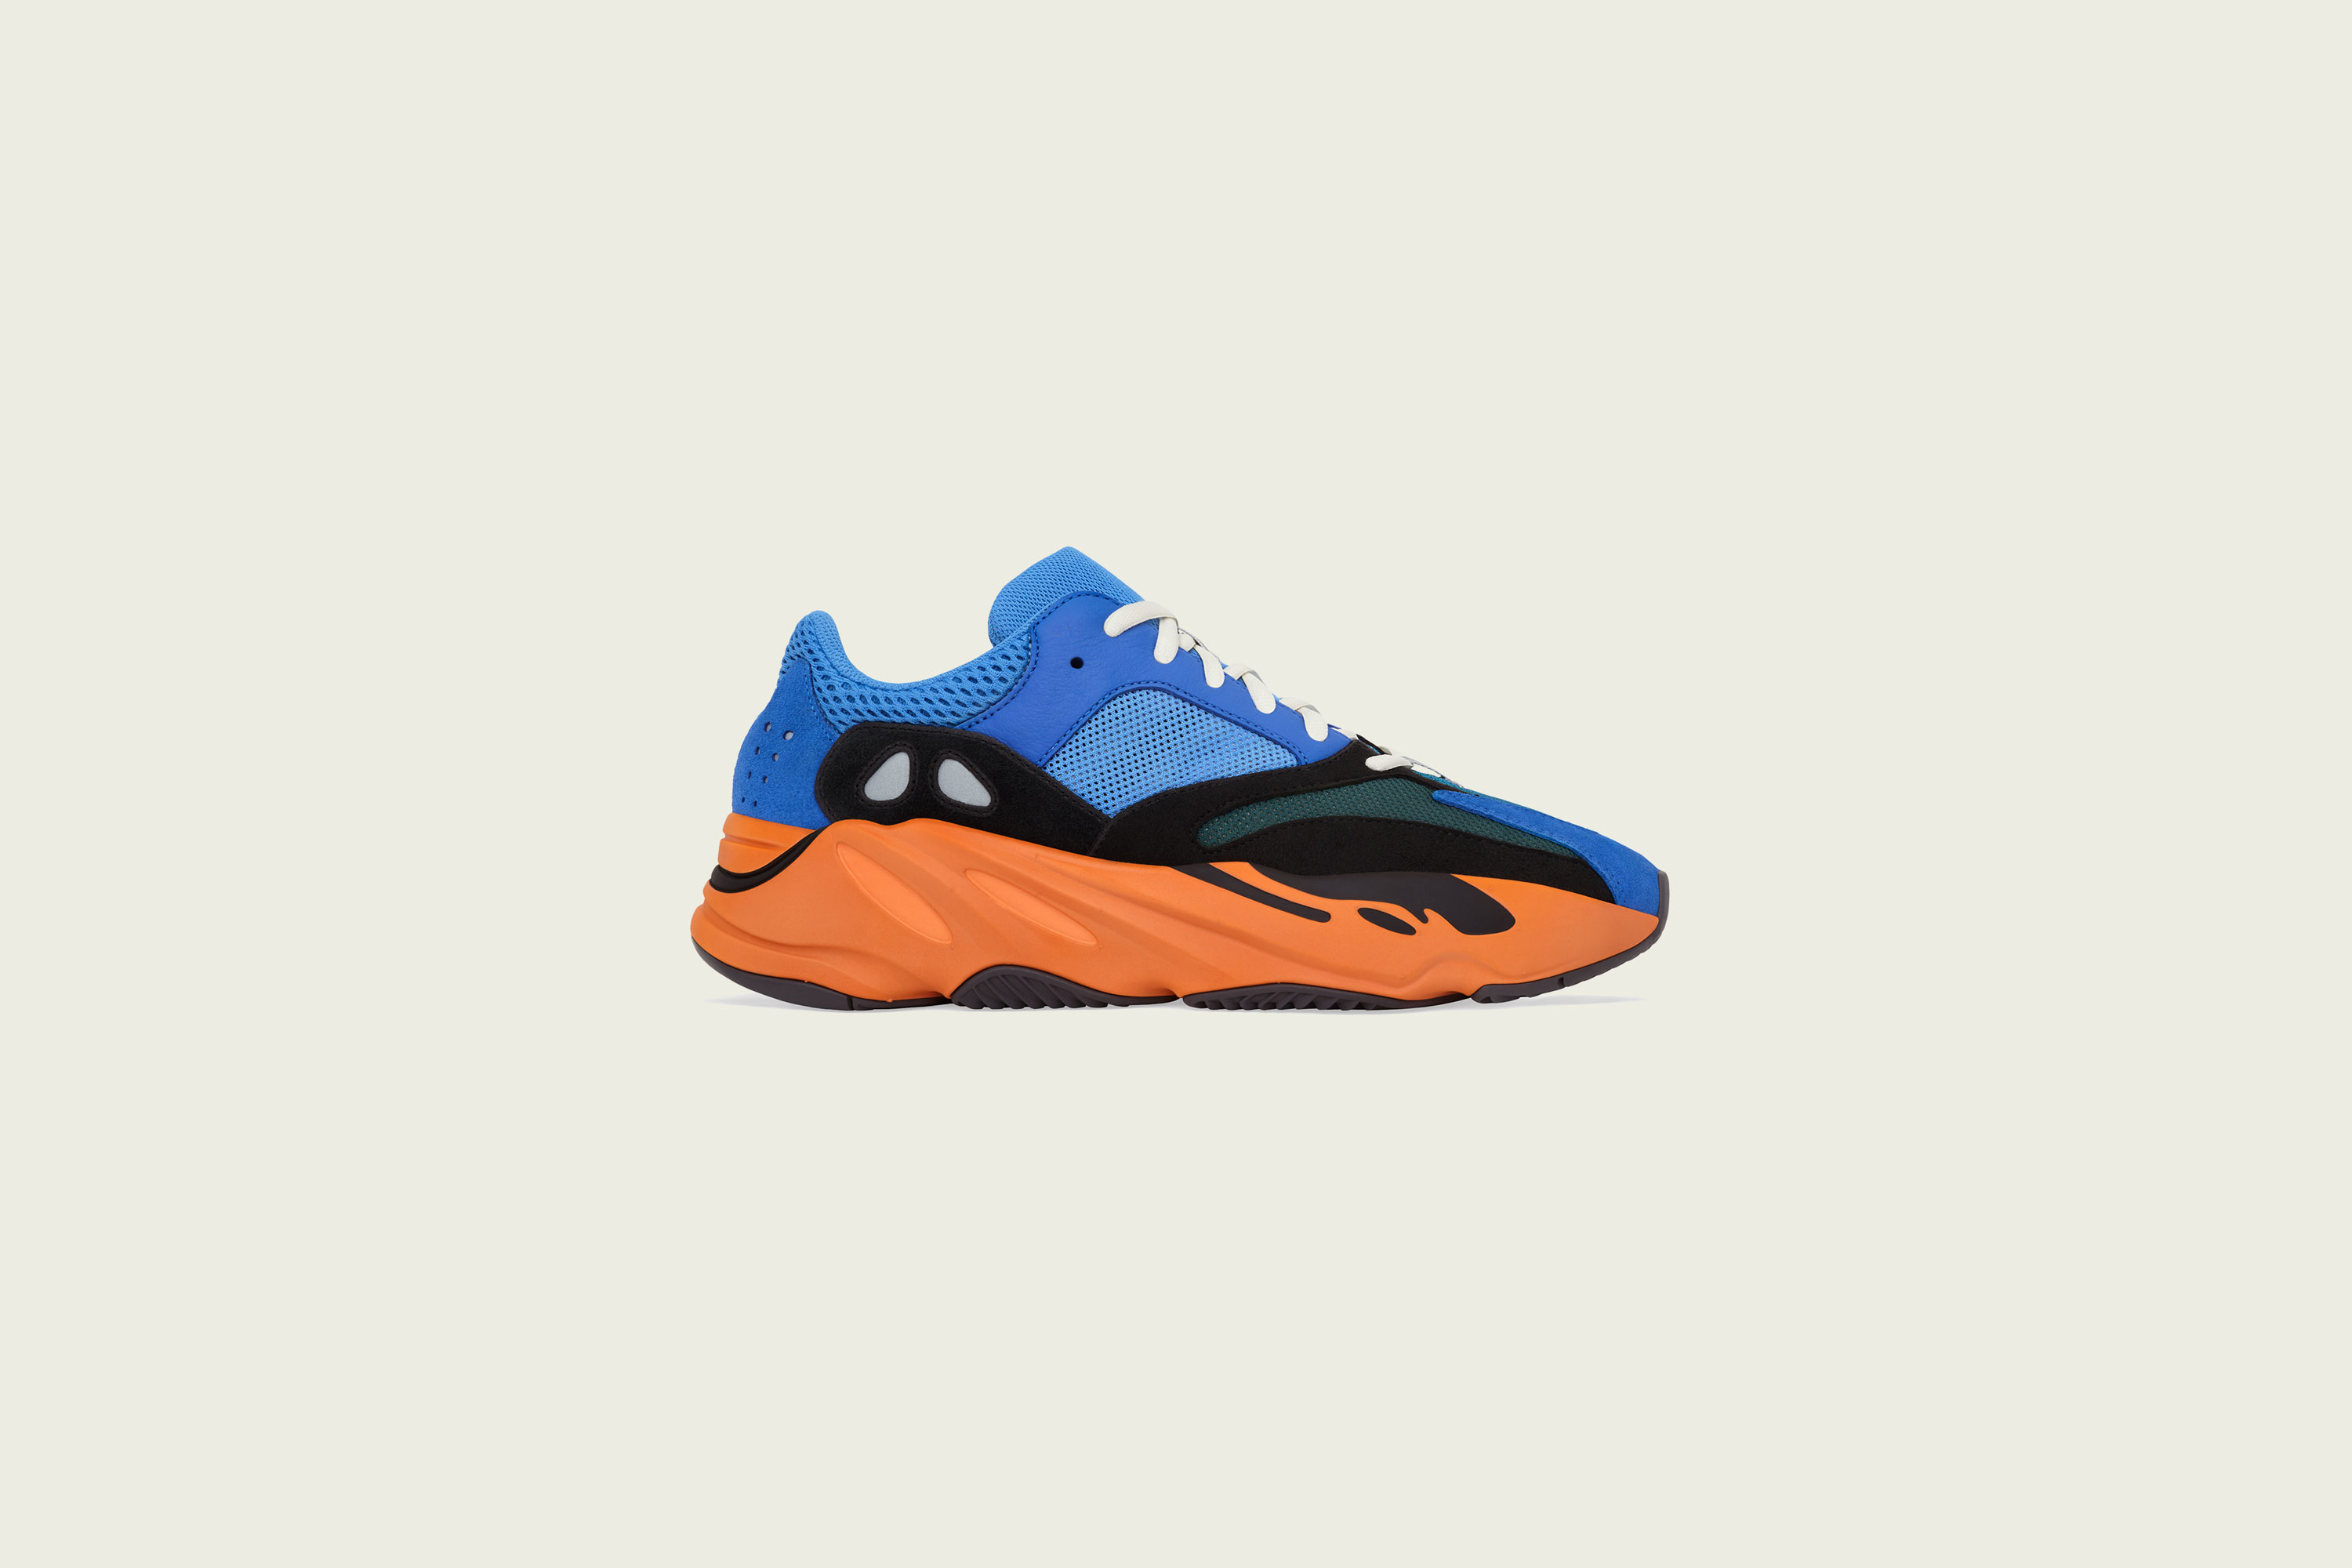 adidas - Yeezy Boost 700v1 - Bright Blue - Up There